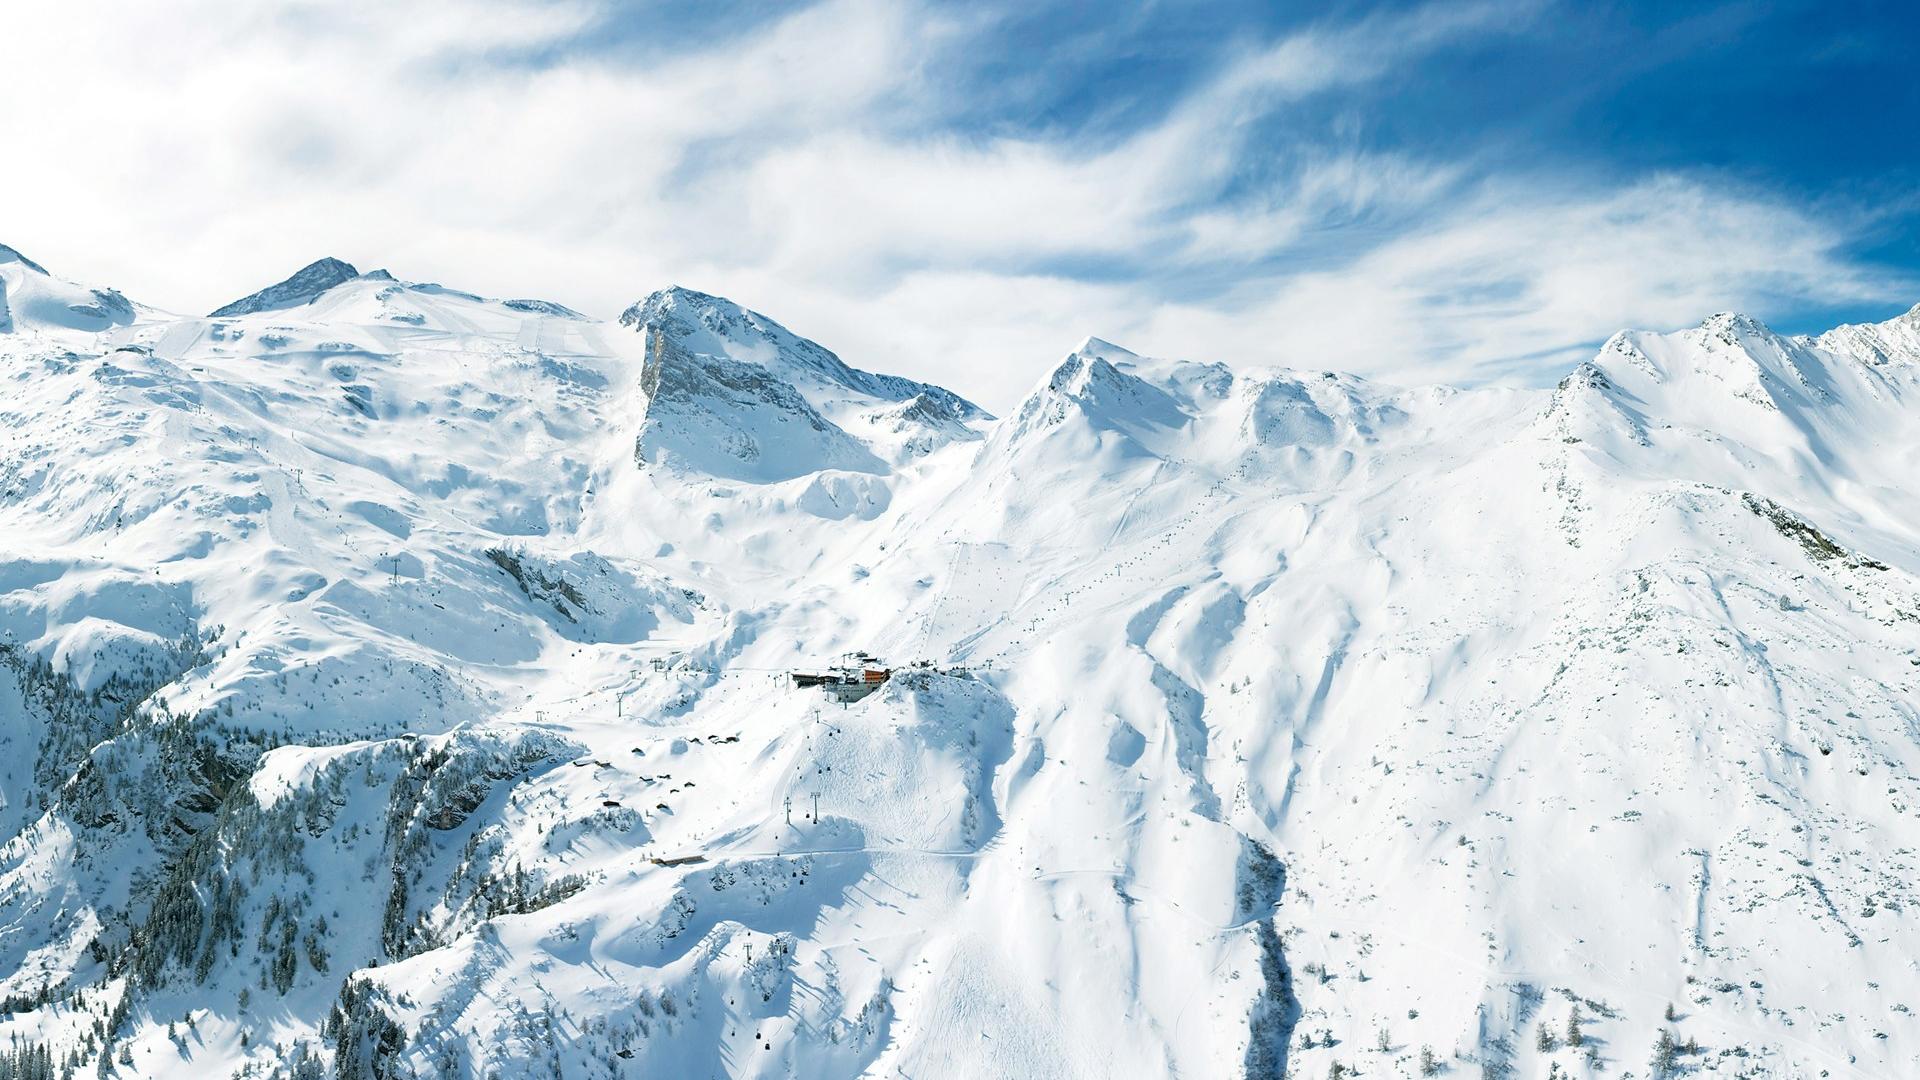 The blue sky and mountain snow desktop backgrounds wide wallpapers